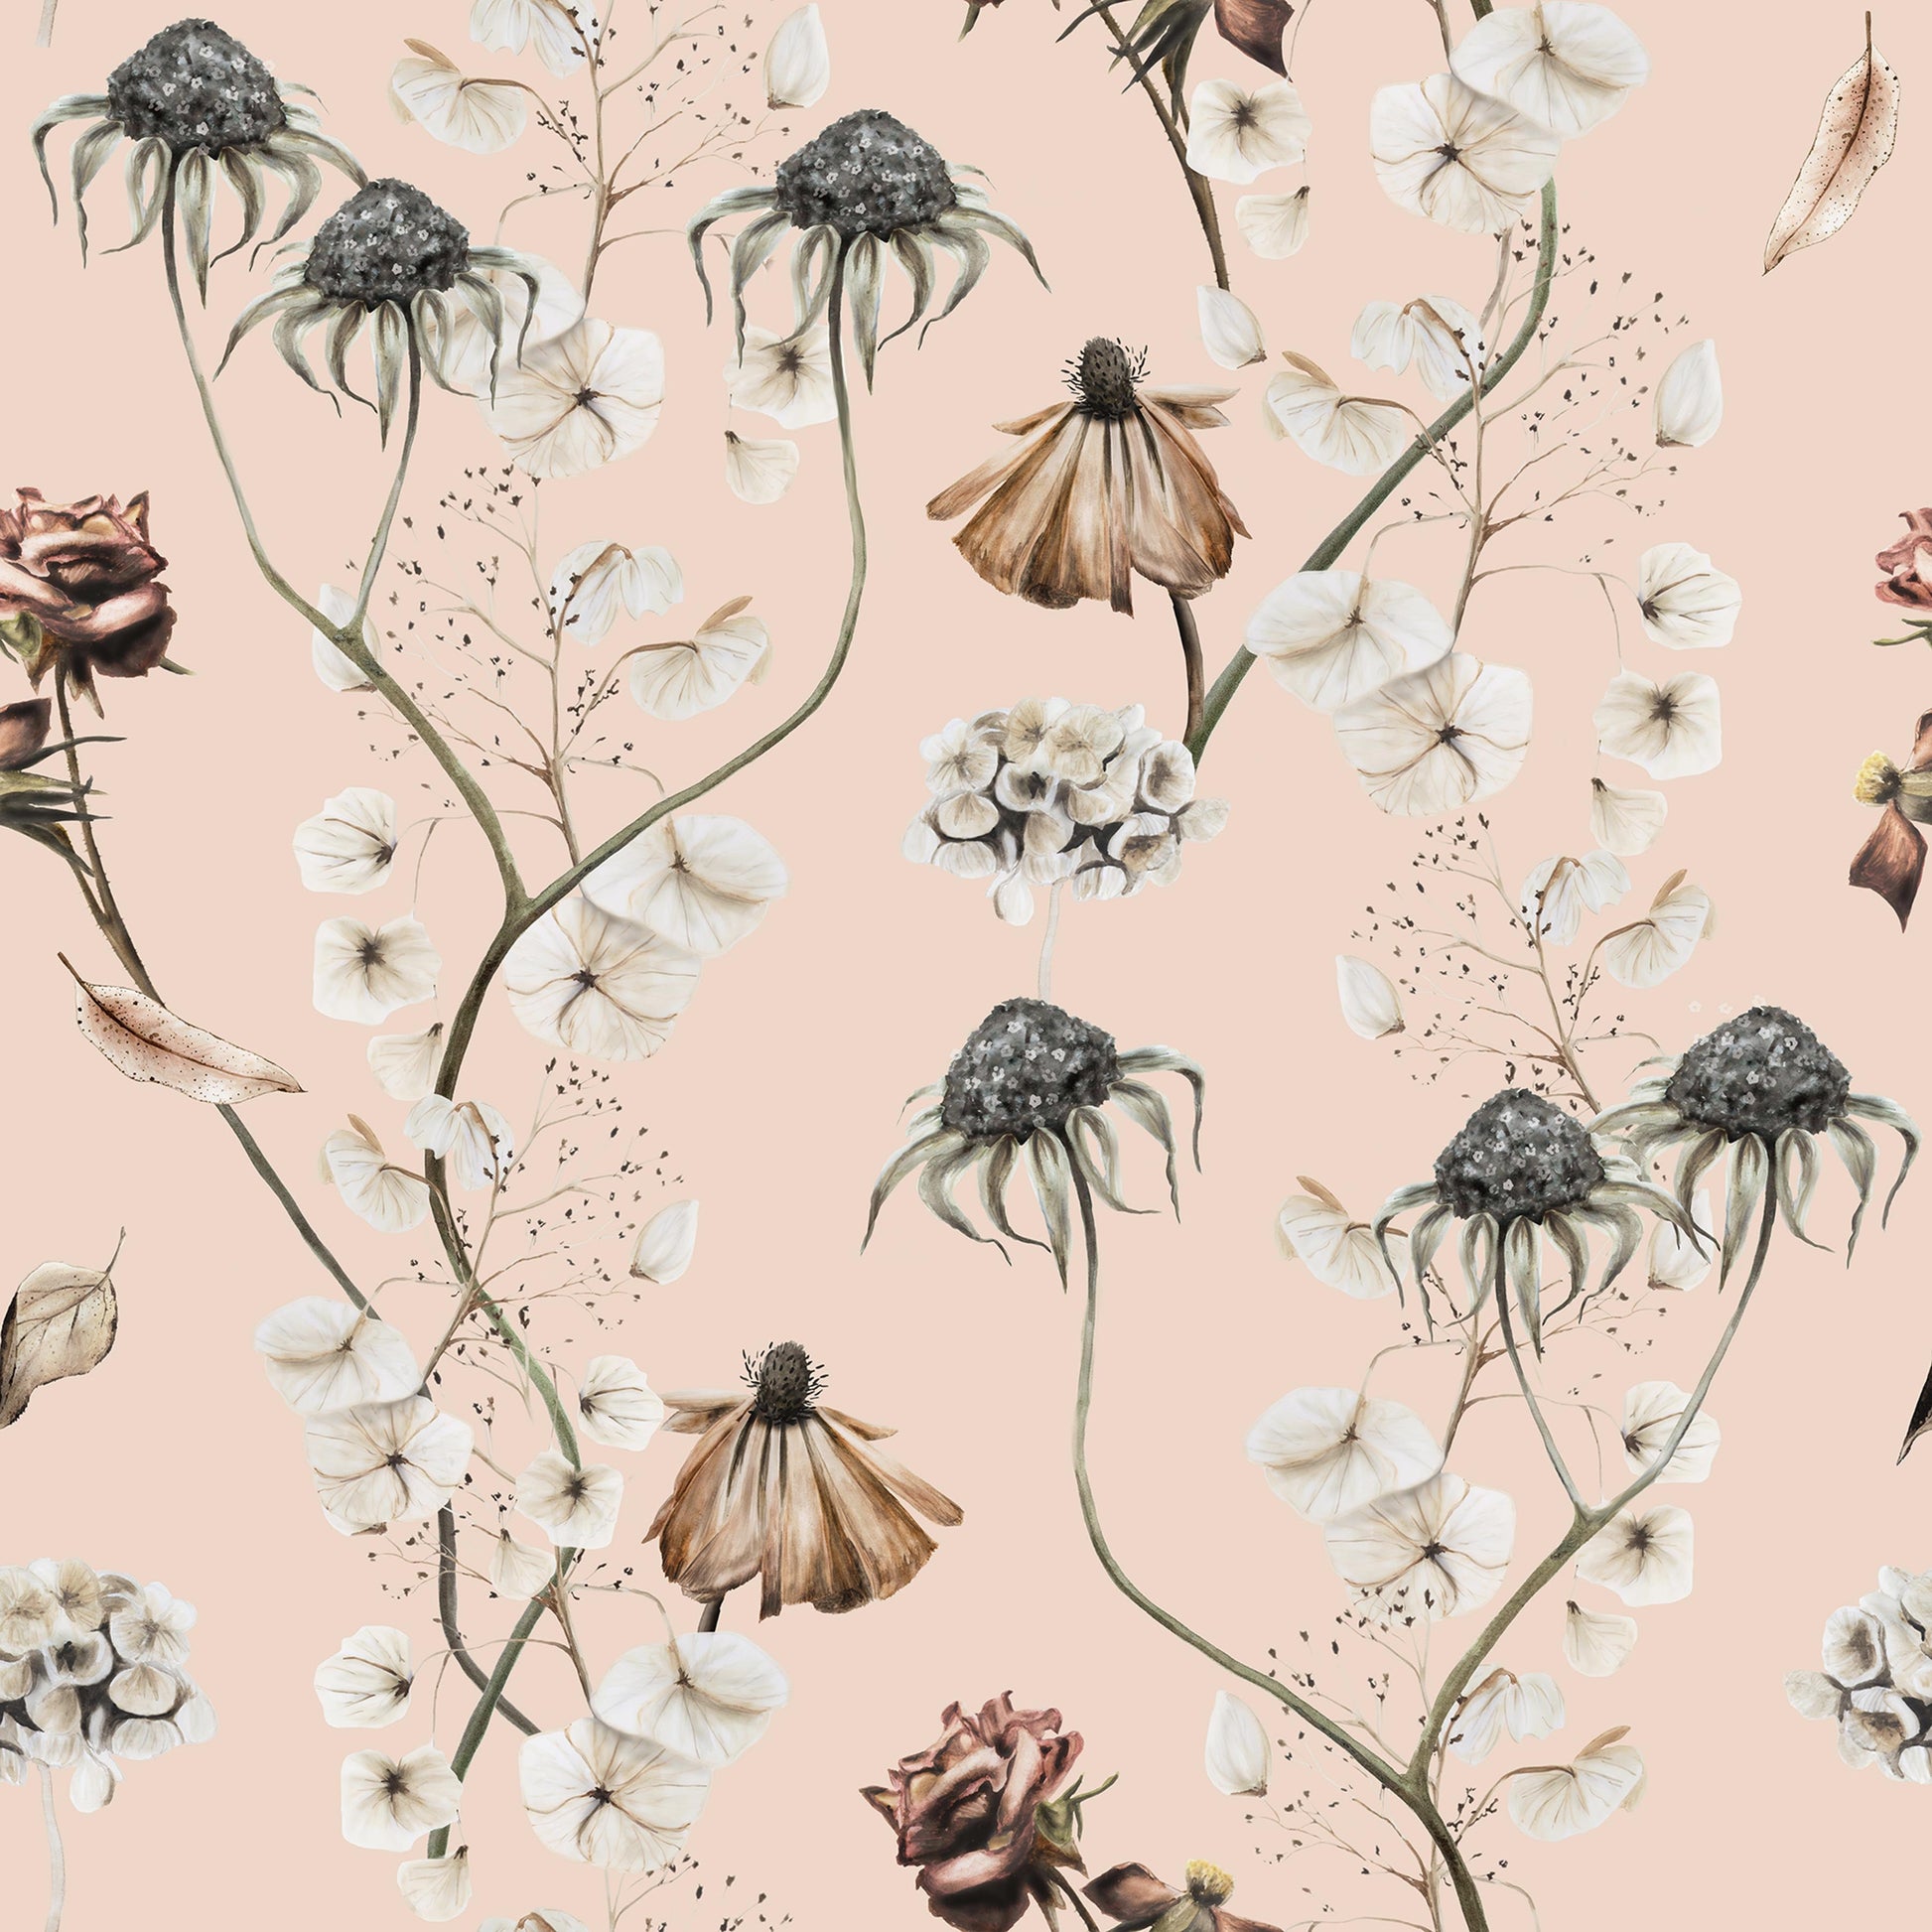 Trailing floral pink flower fabric, fabric to cover headboard, curtain fabric, fabric for blinds